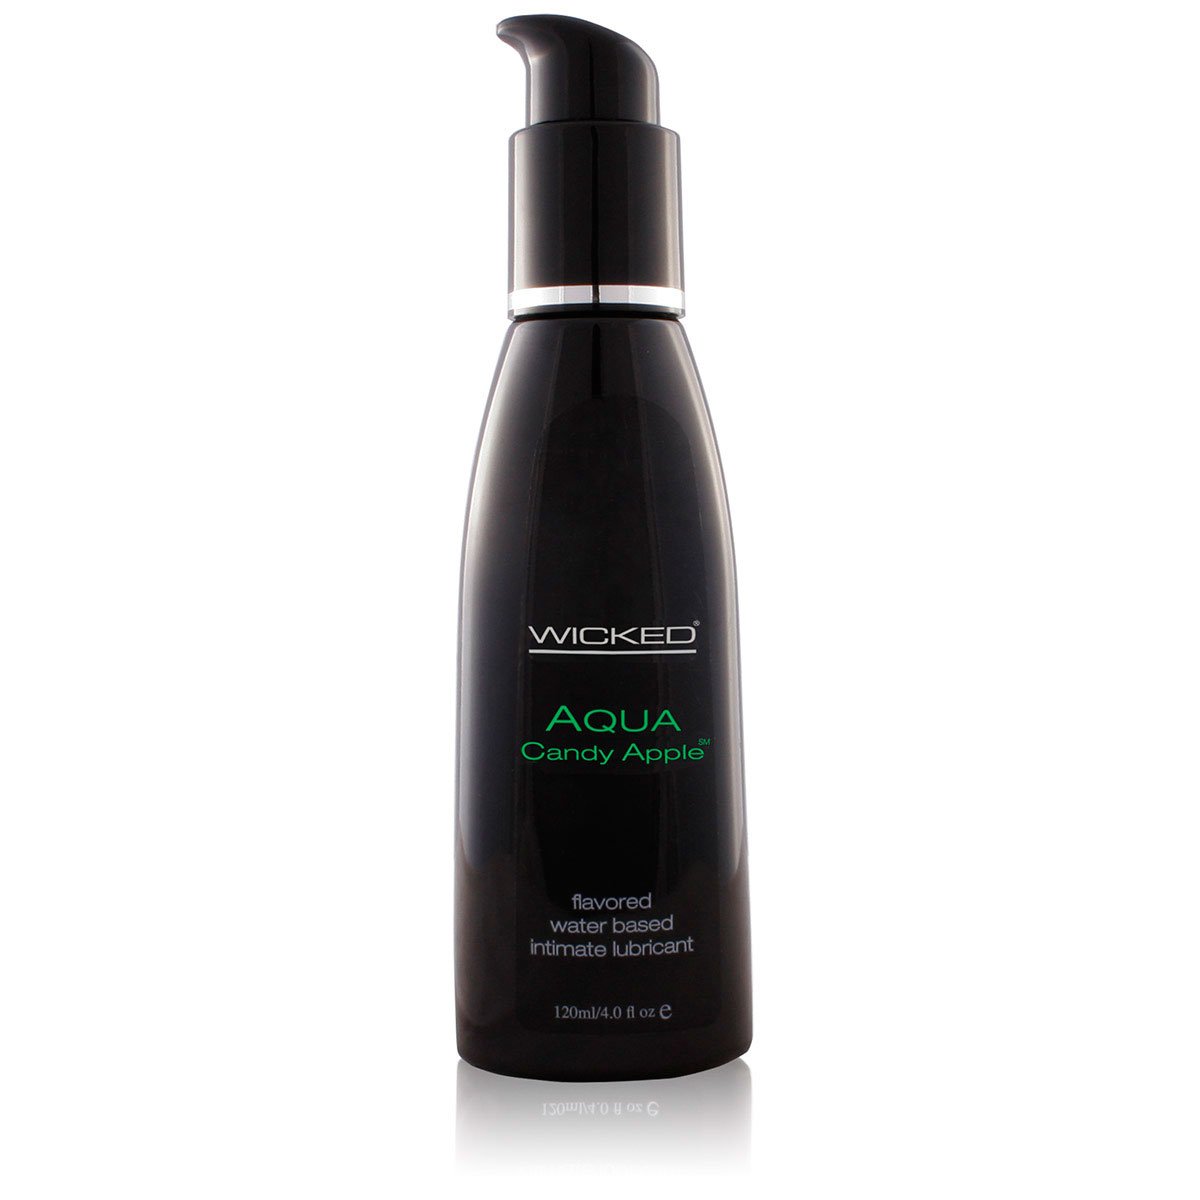 Wicked Aqua Flavored - Buy At Luxury Toy X - Free 3-Day Shipping